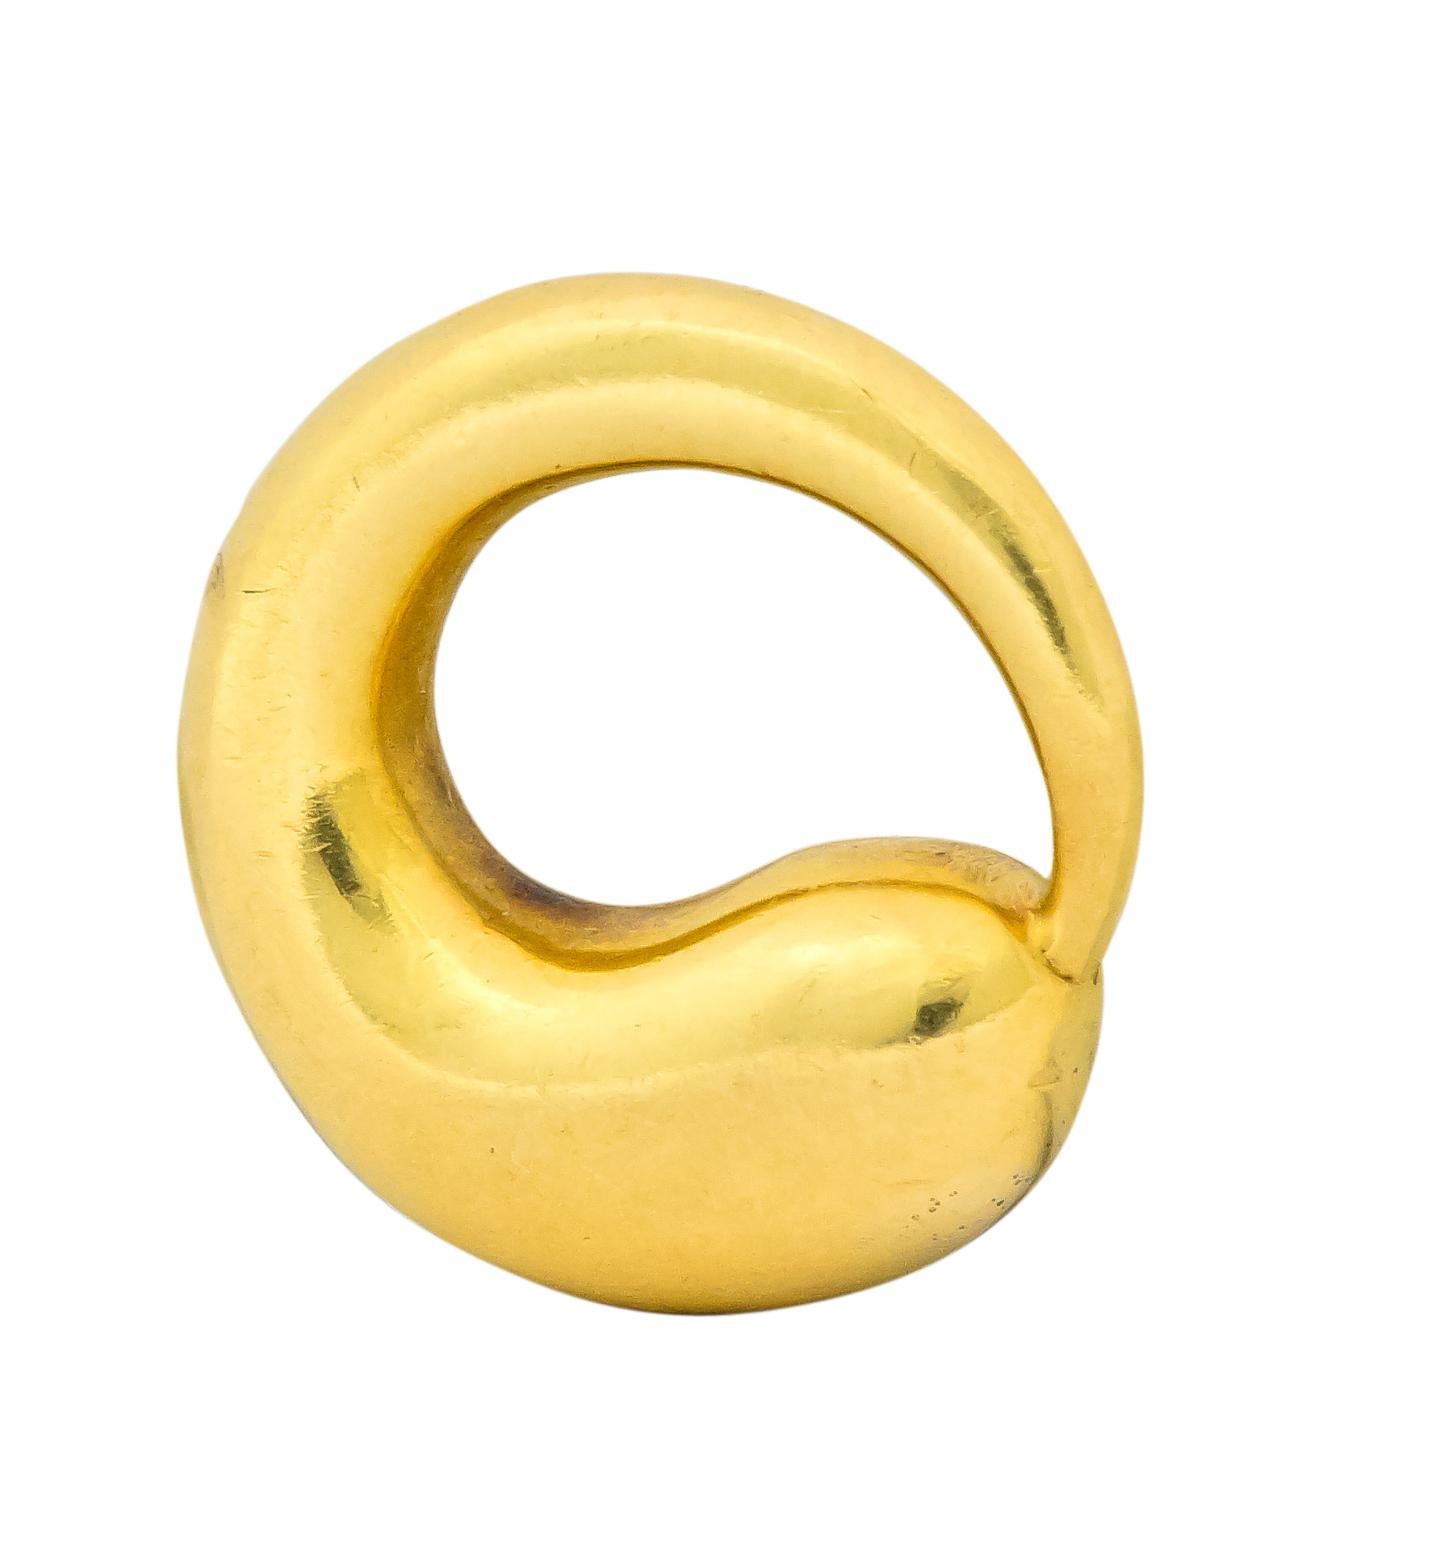 Designed as a the outline of a circle of graduating width and thickness

Highly polished 18 karat gold

From the Eternal Circle collection

Fully signed Tiffany & Co. 18K Peretti

Measures 16 mm x 16 mm with 4 mm depth

Total weight: 3.9